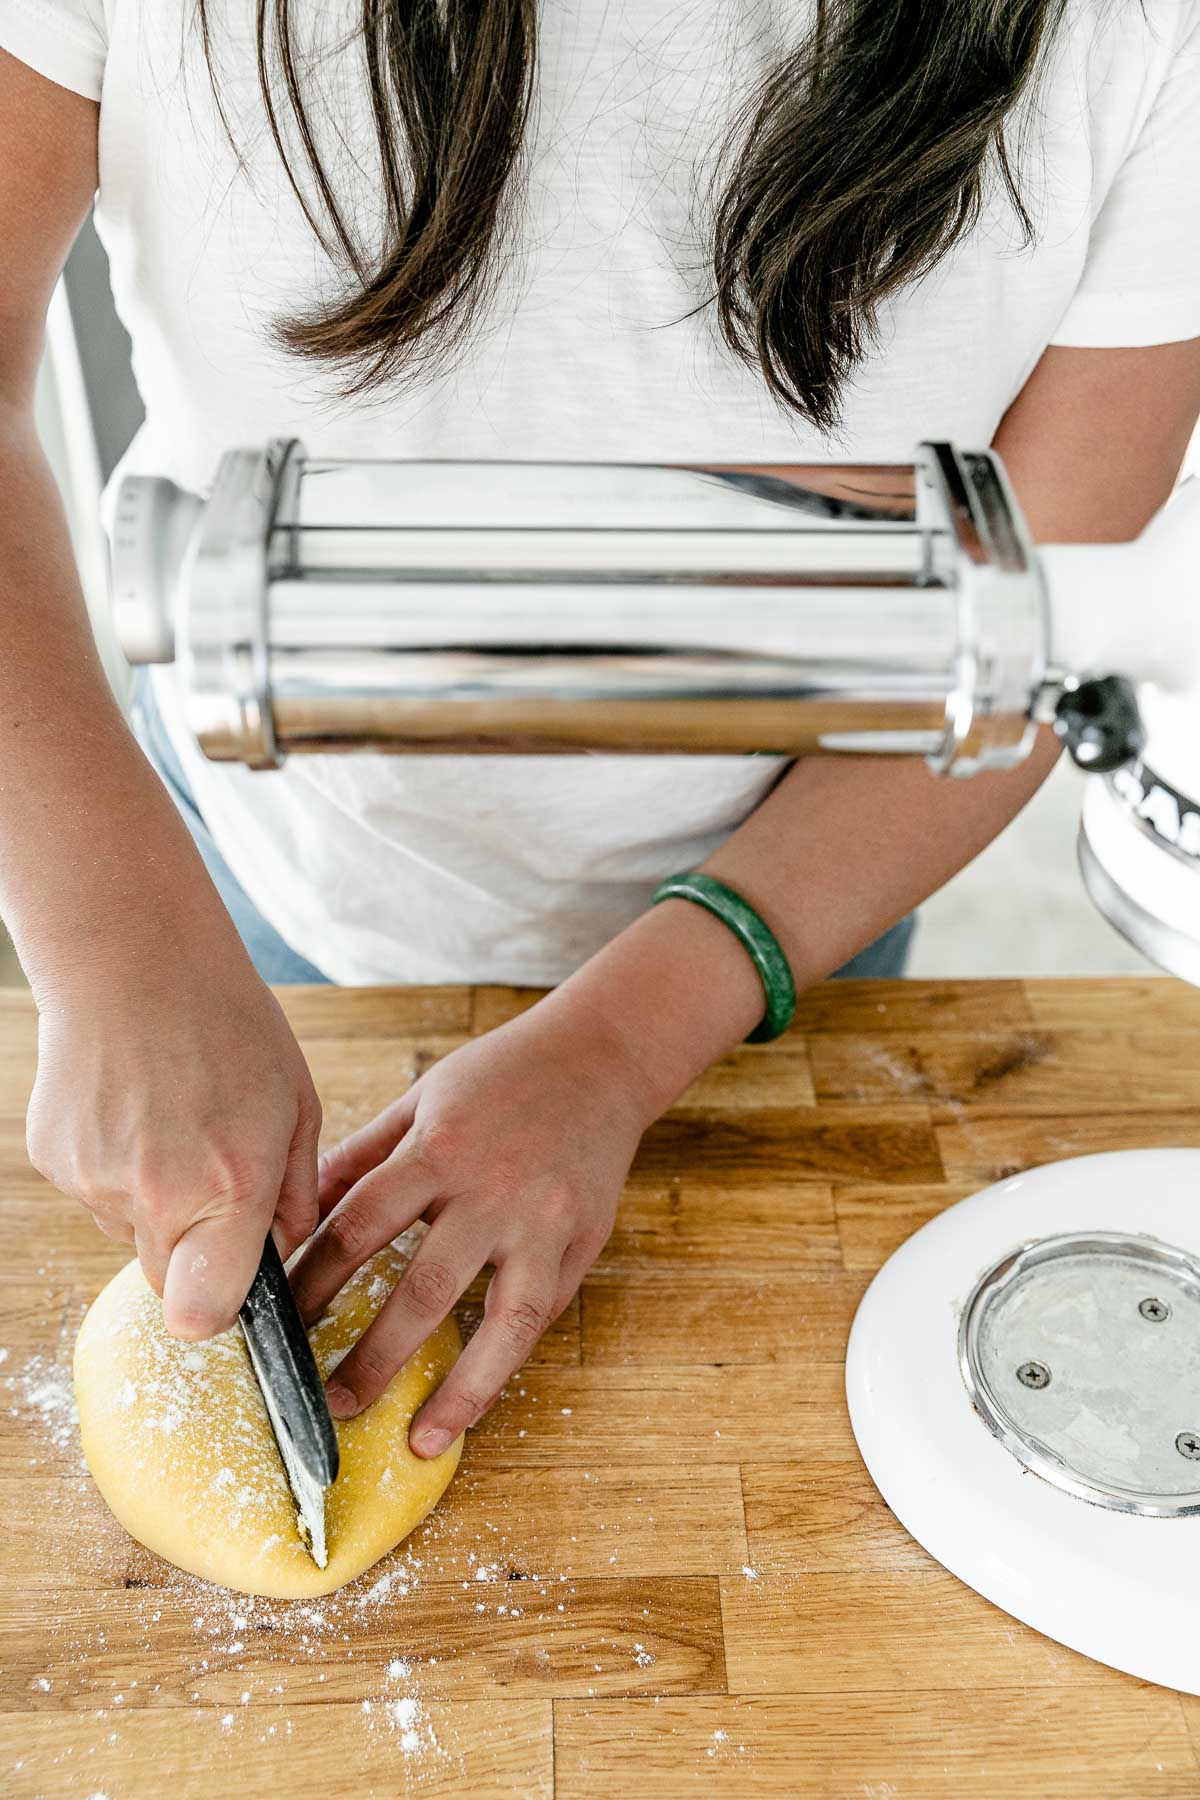 Jess of Plays Well With Butter uses a bench scraper to divide rested fresh pasta dough into pieces prior to rolling it out using a pasta attachment on her KitchenAid Stand Mixer. The pasta dough has been lightly dusted with flour and sits atop a butcher block countertop.